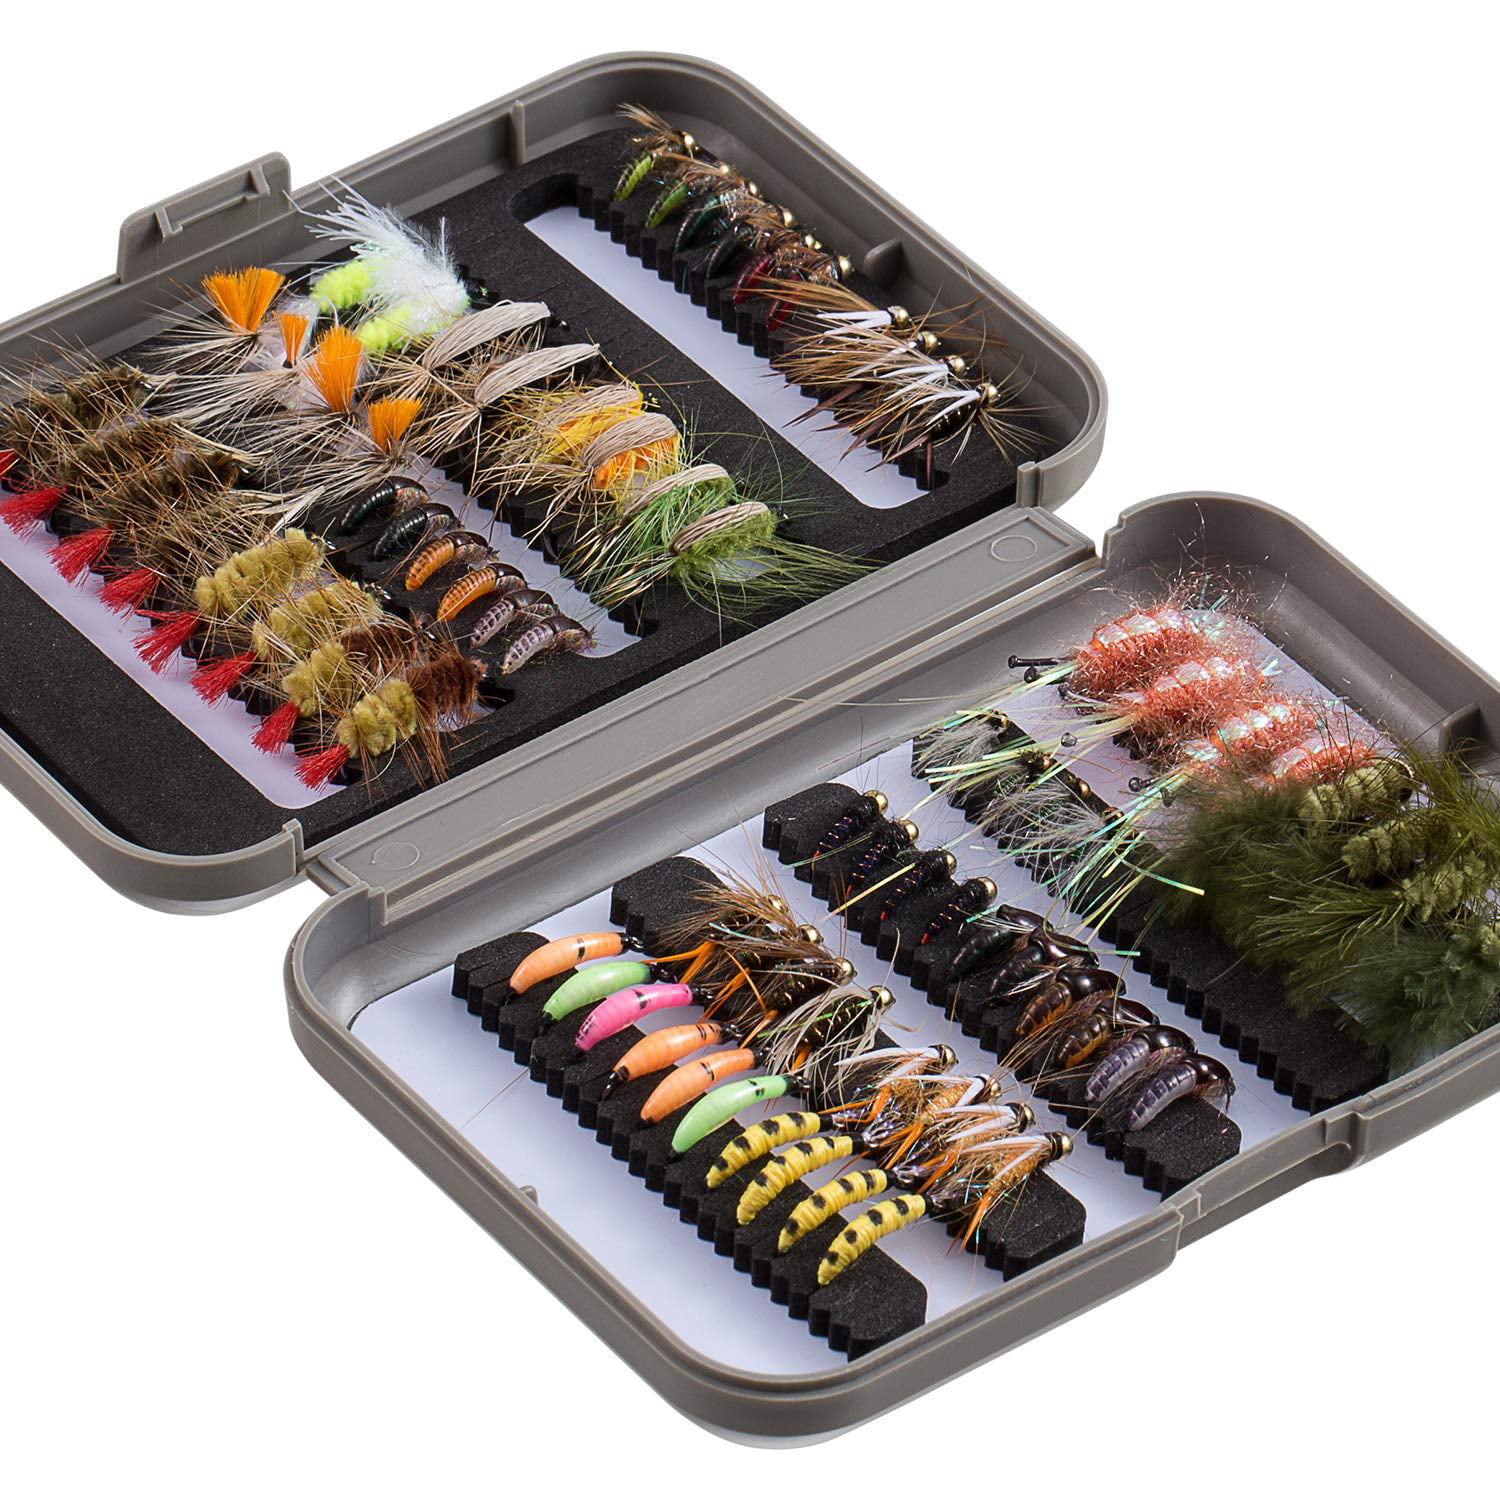 FNC 40pcs/set Dry Flies Fly Fishing Baits Kit Bass Salmon Trouts Flies  Floating Assortment with Box